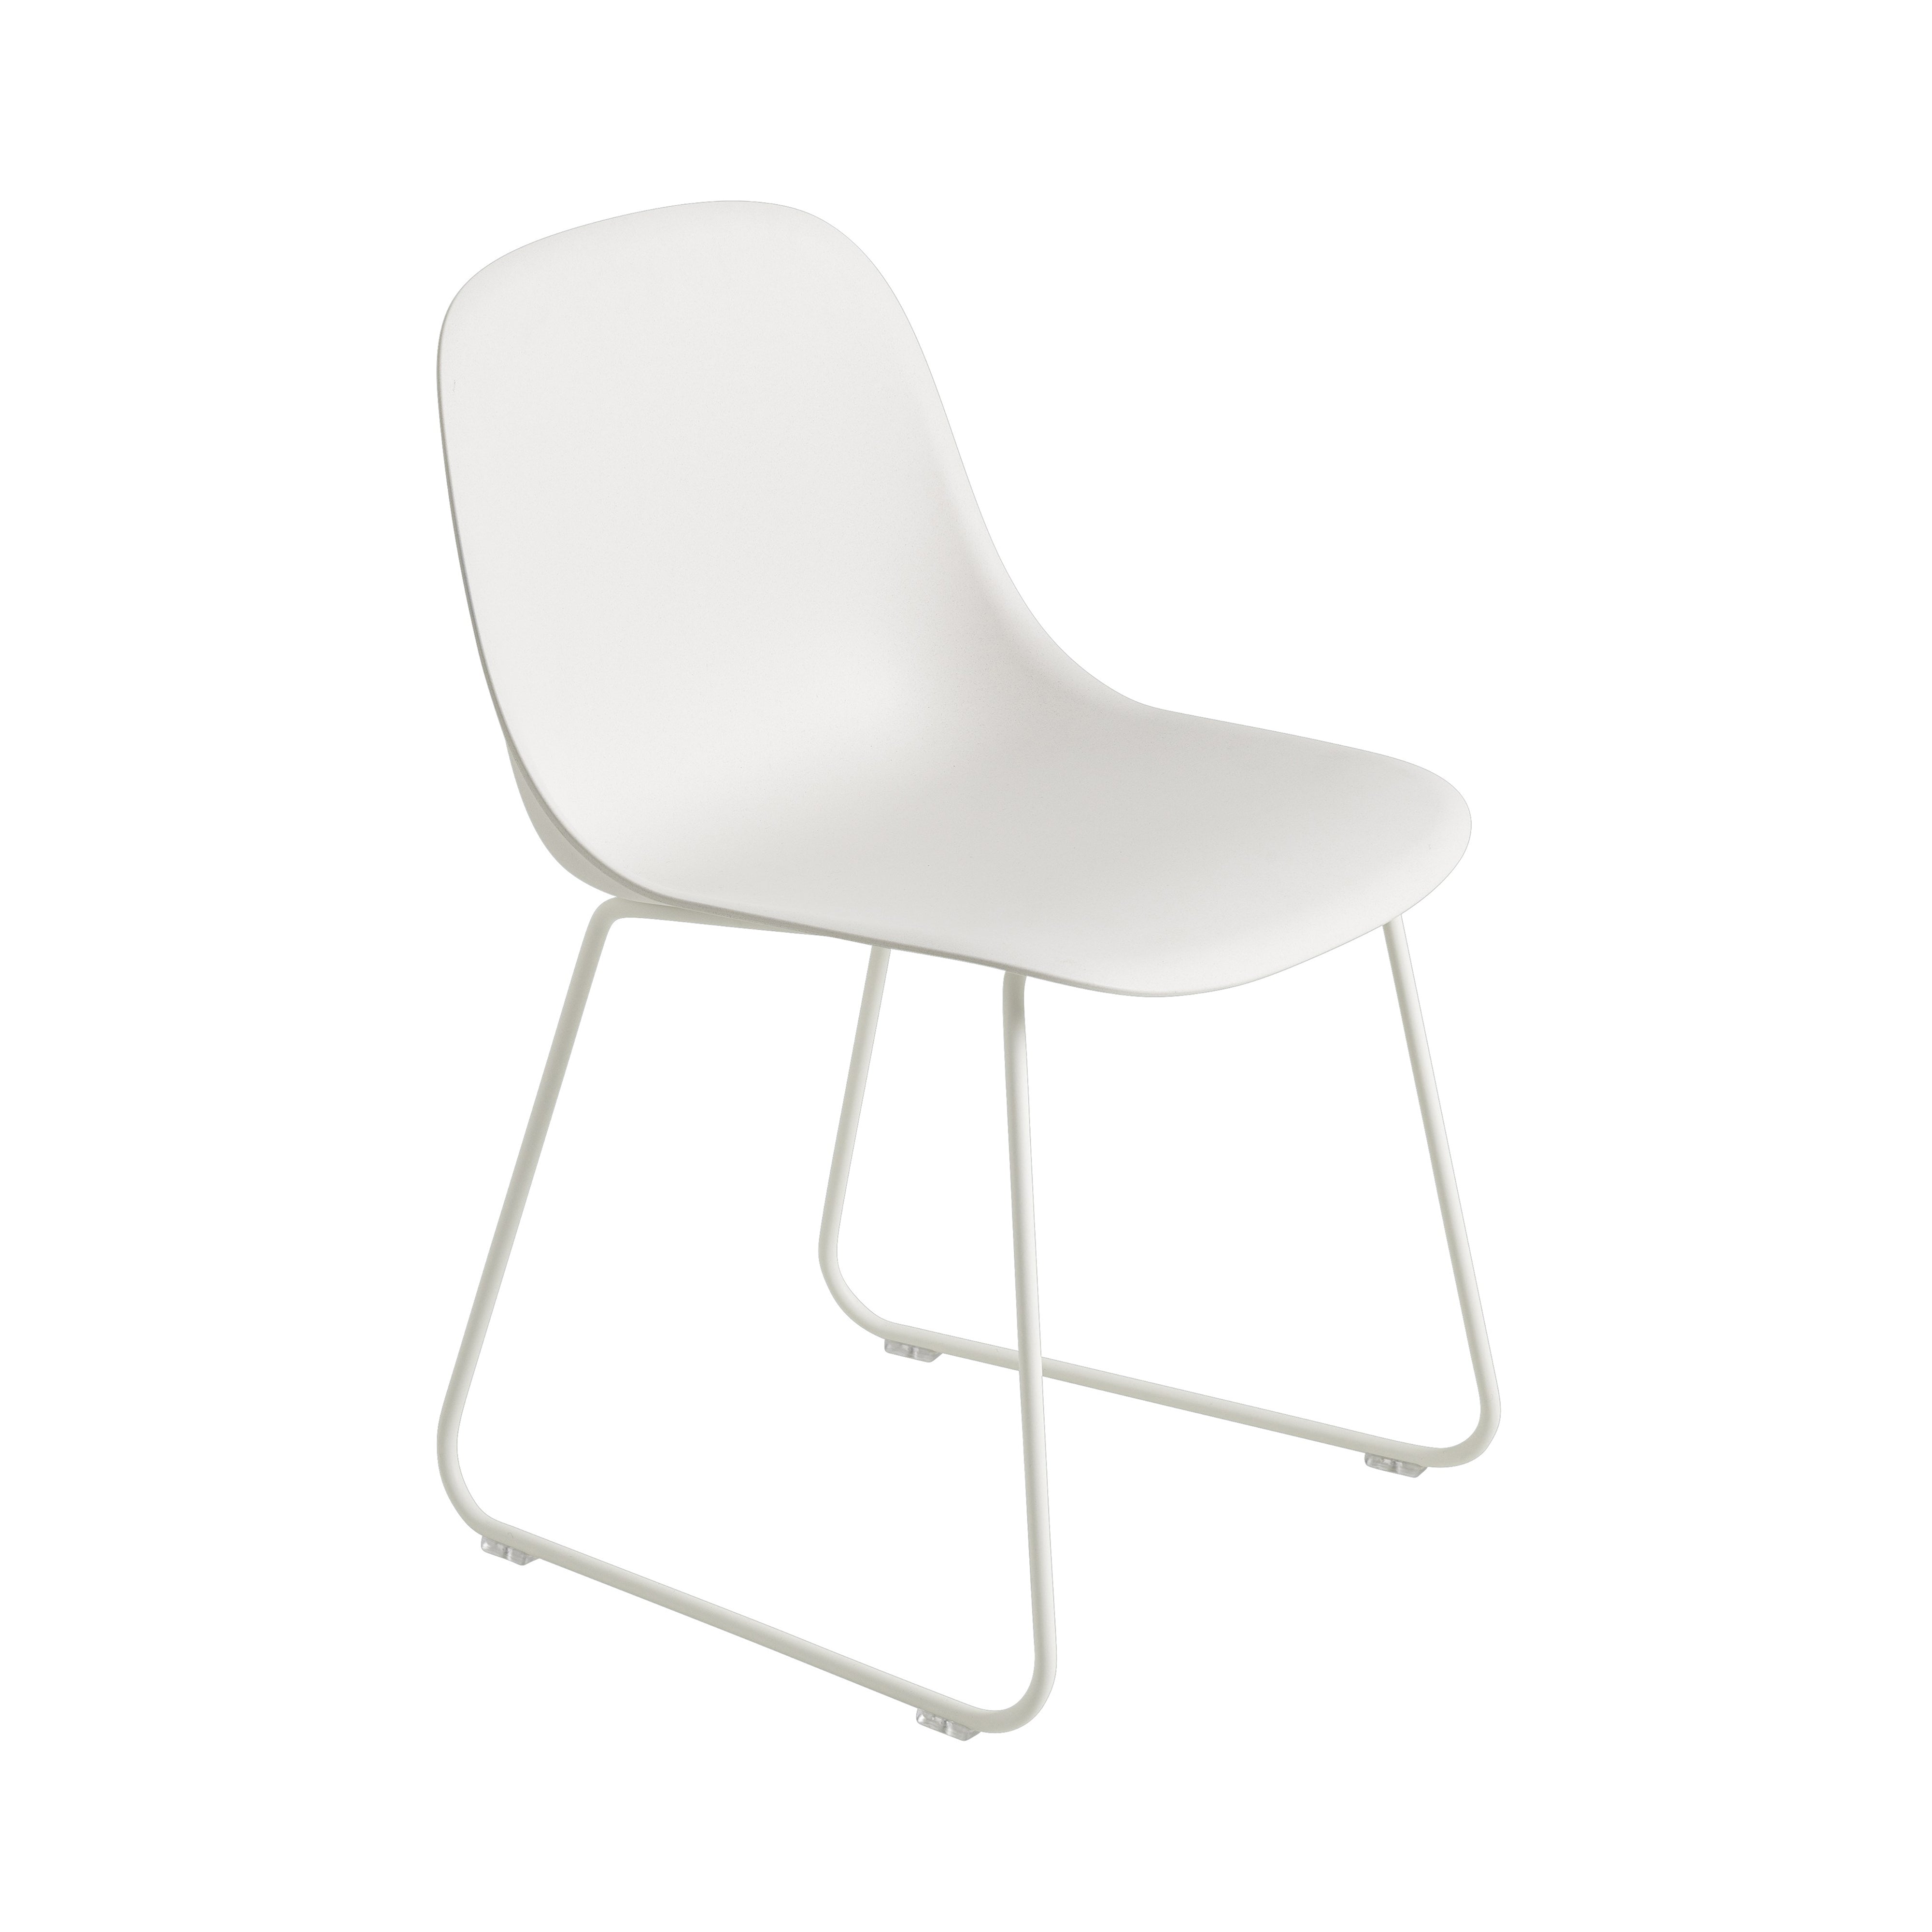 Fiber Side Chair: Sled Base + Recycled Shell + White + Natural White